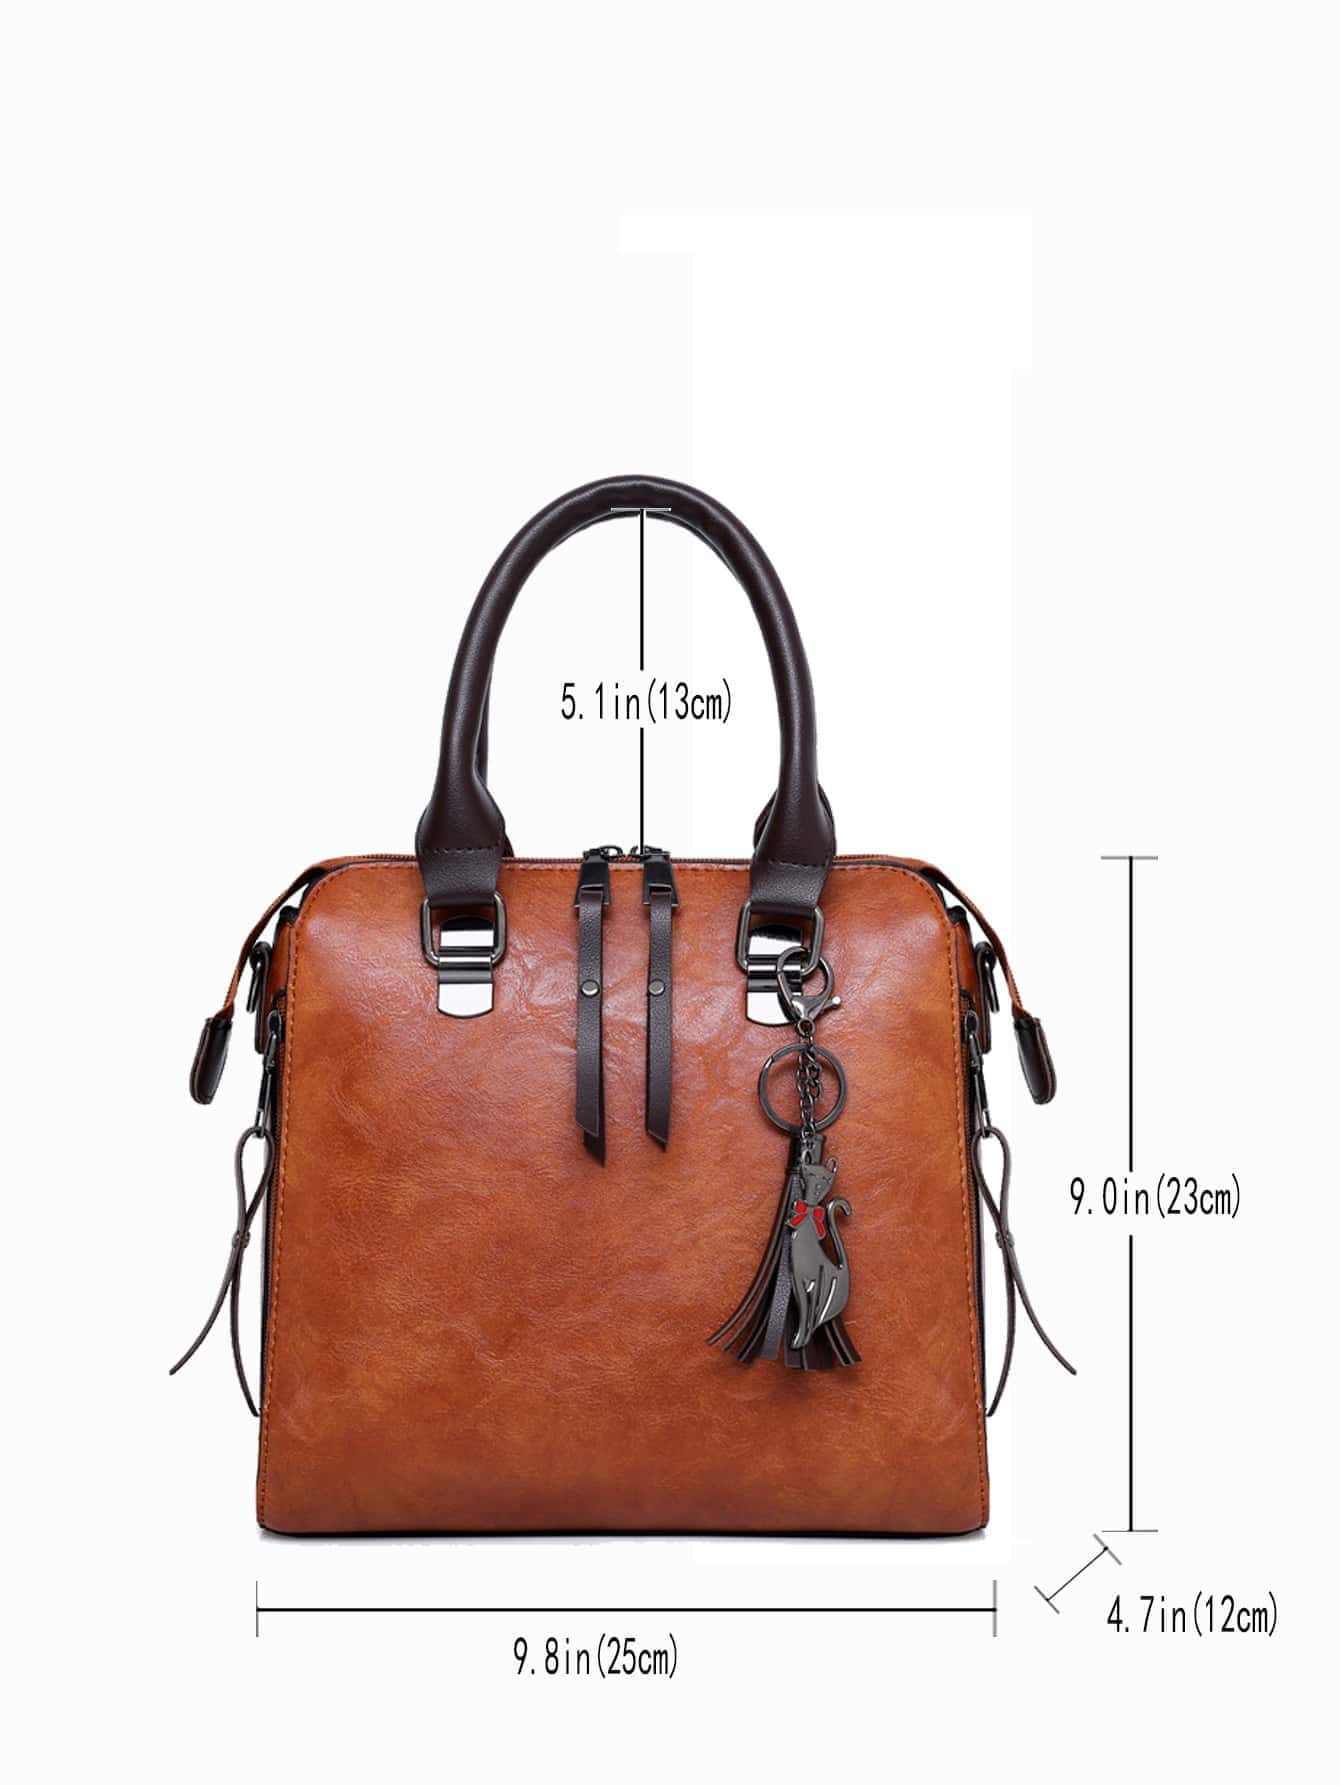 【Black Friday Sale】New Fashion Trend One Shoulder Crossbody Mother Bag Set of Four Pieces Retro Contrast Oil Leather Handheld Women's Bag